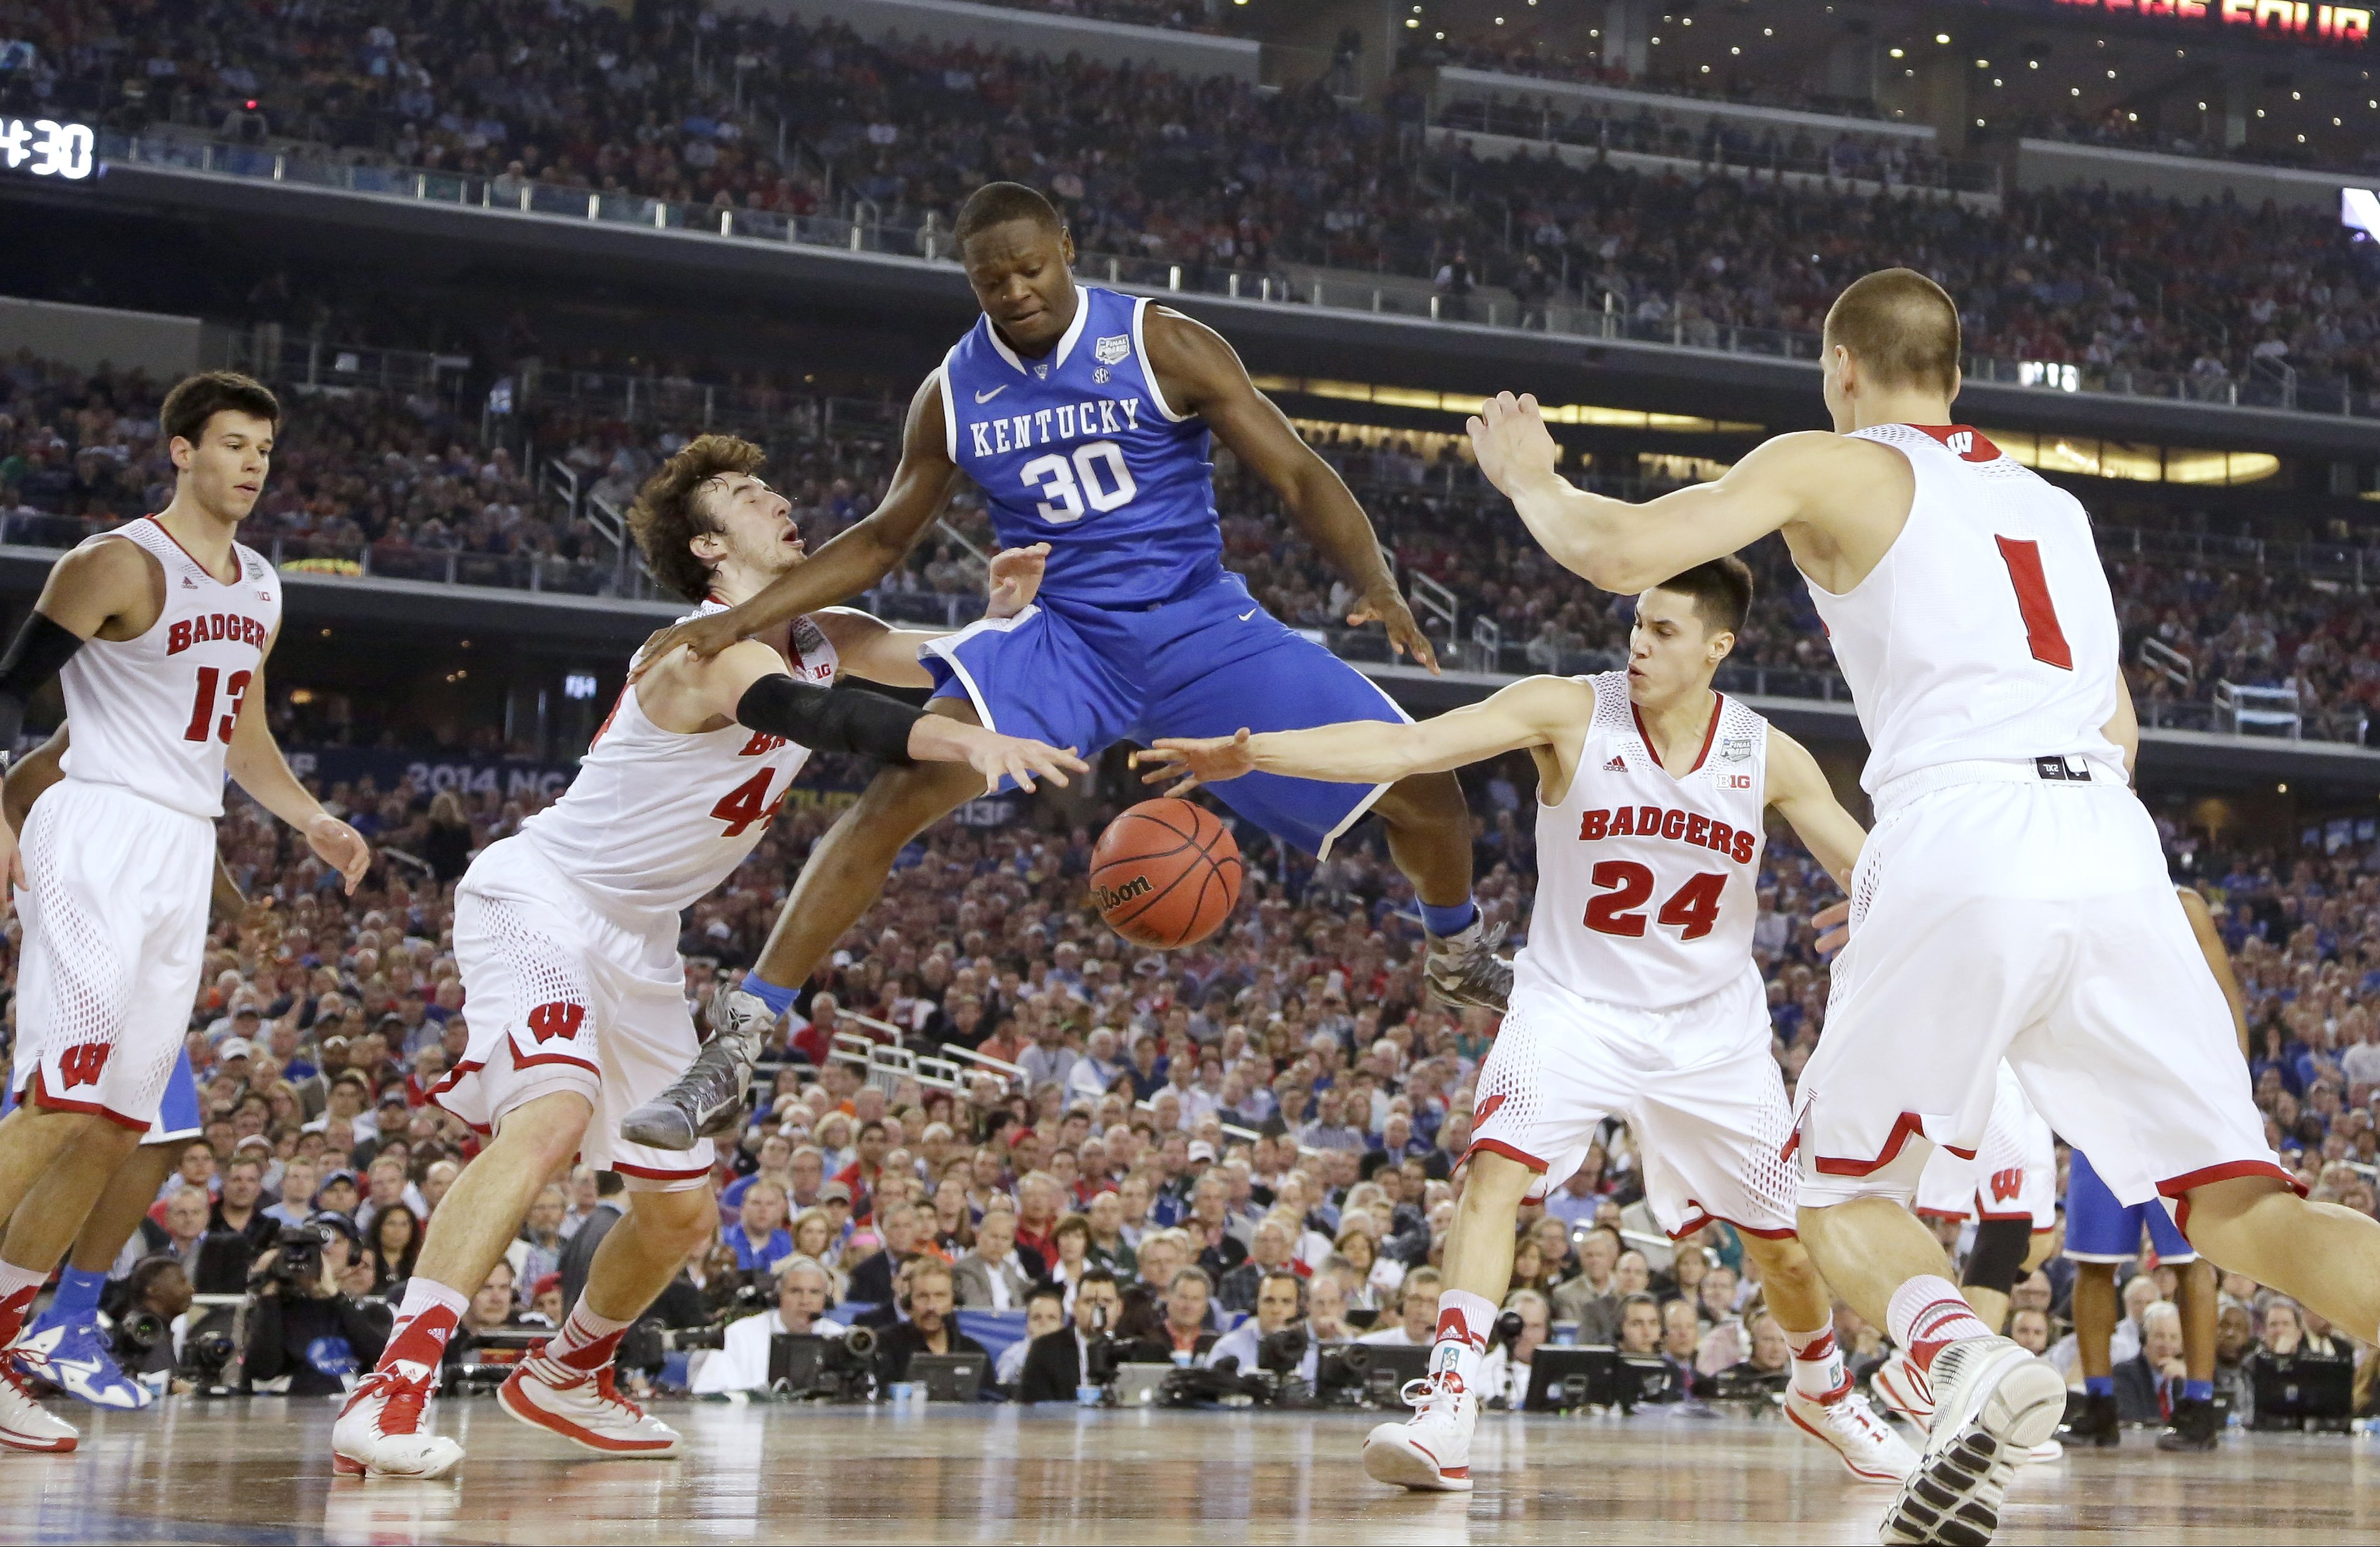 Kentucky forward Julius Randle loses the ball as, from left, Wisconsin forward Frank Kaminsky, guard Bronson Koenig and Ben Brust defend during the first half of the NCAA Final Four tournament college basketball semifinal game, April 5, 2014, in Arlington, Texas.